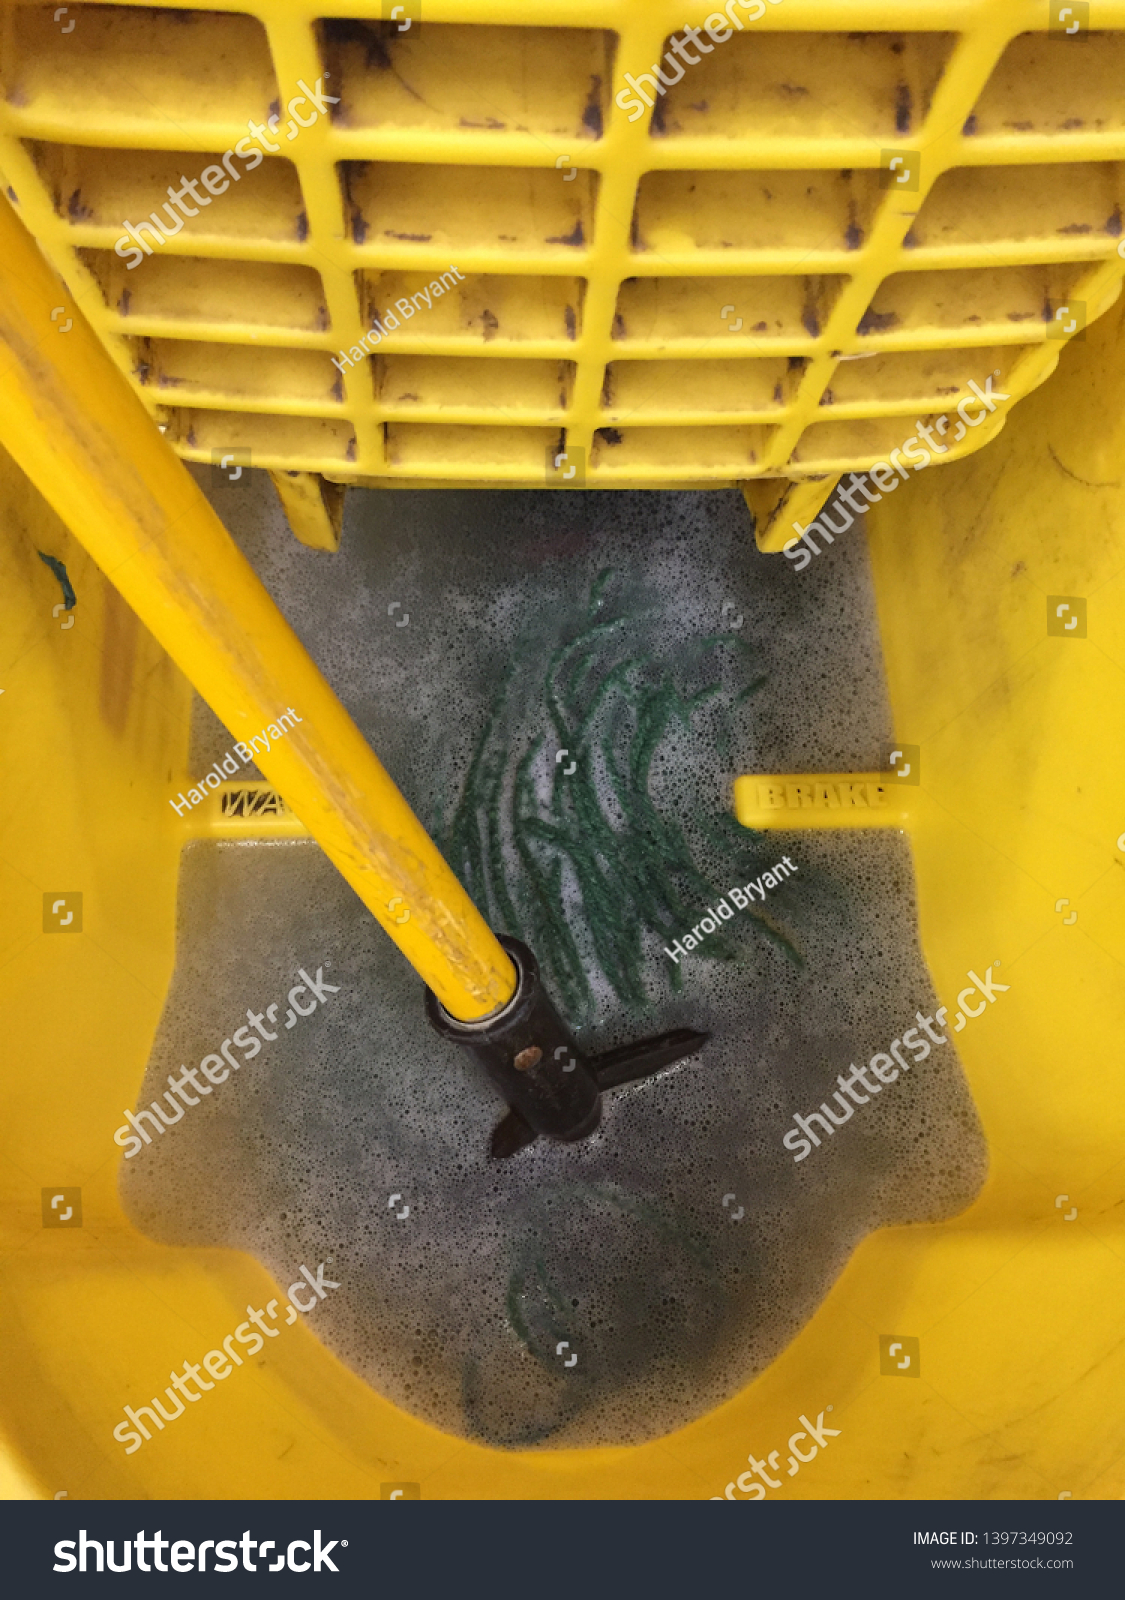 Download Yellow Mop Bucket Dirty Water Backgrounds Textures Stock Image 1397349092 Yellowimages Mockups